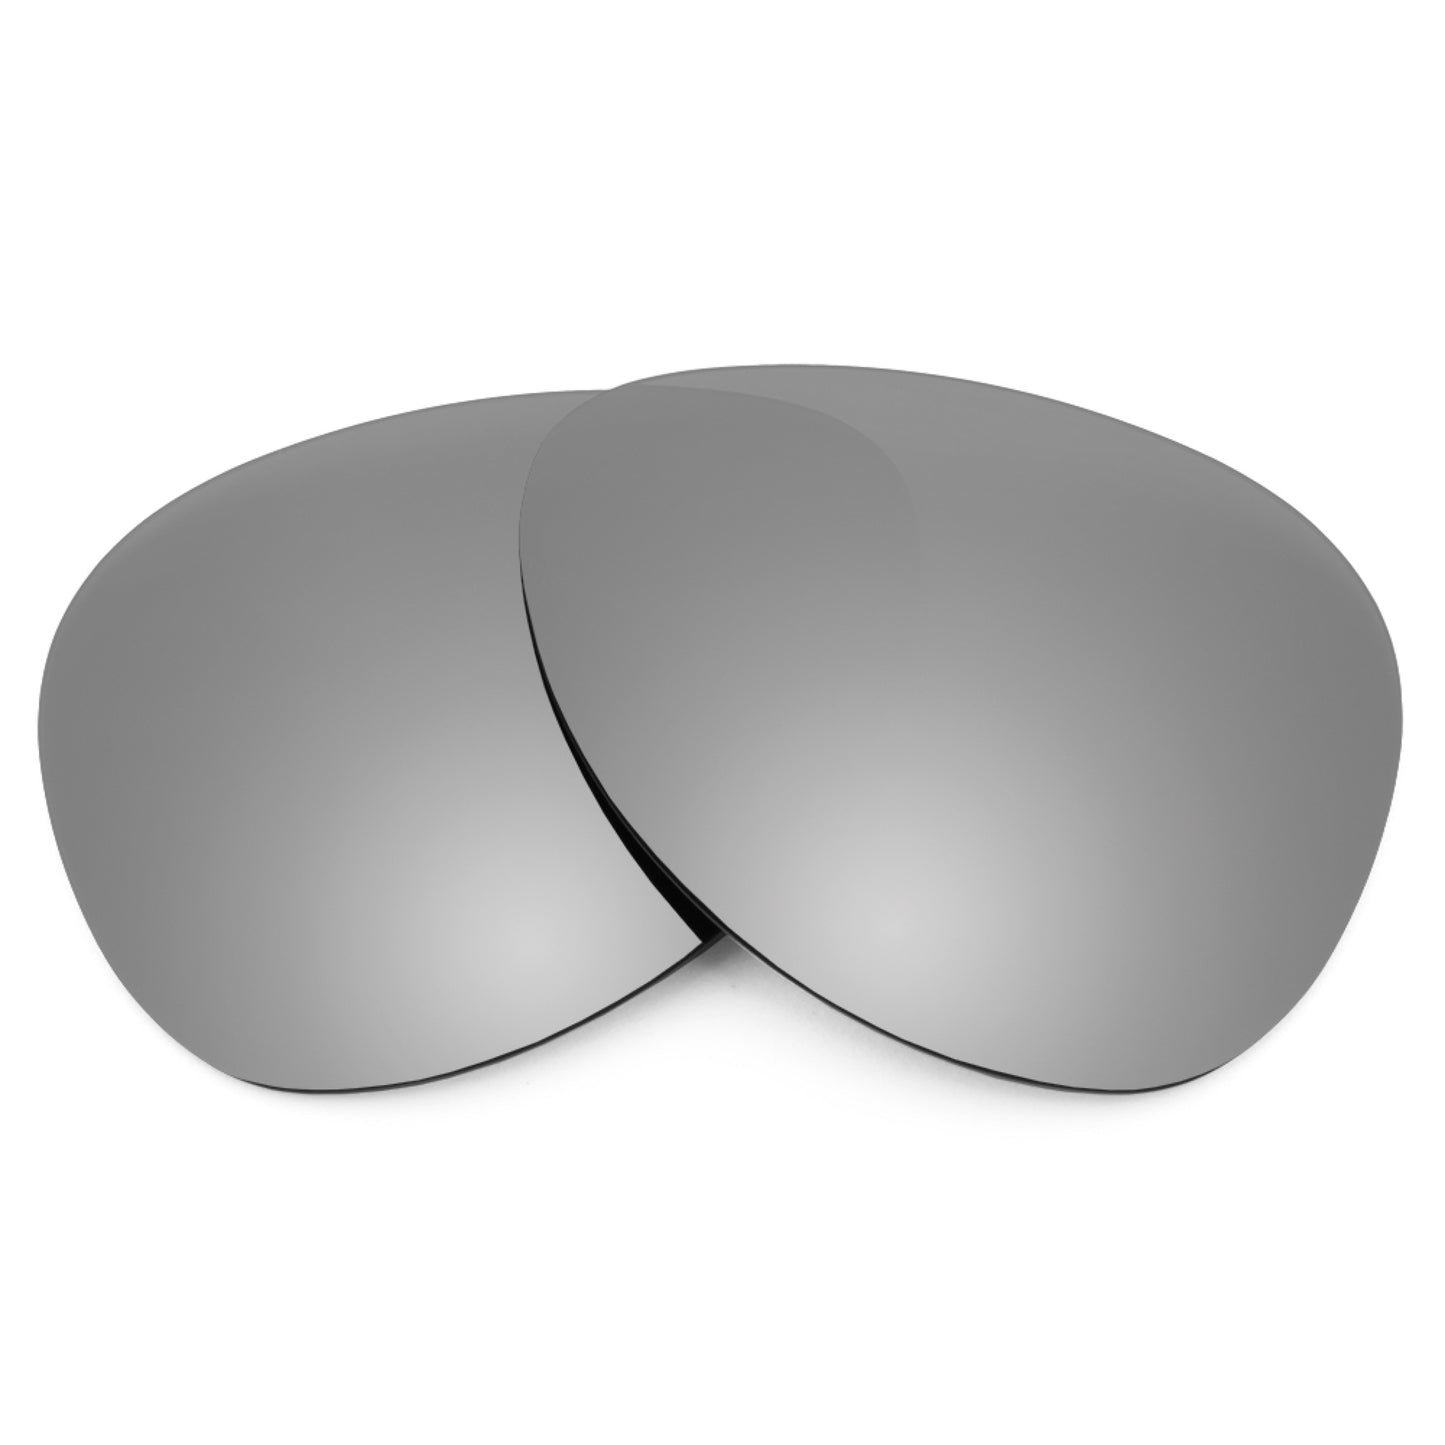 Revant replacement lenses for Ray-Ban Cats 5000 RB4125 59mm Elite Polarized Titanium